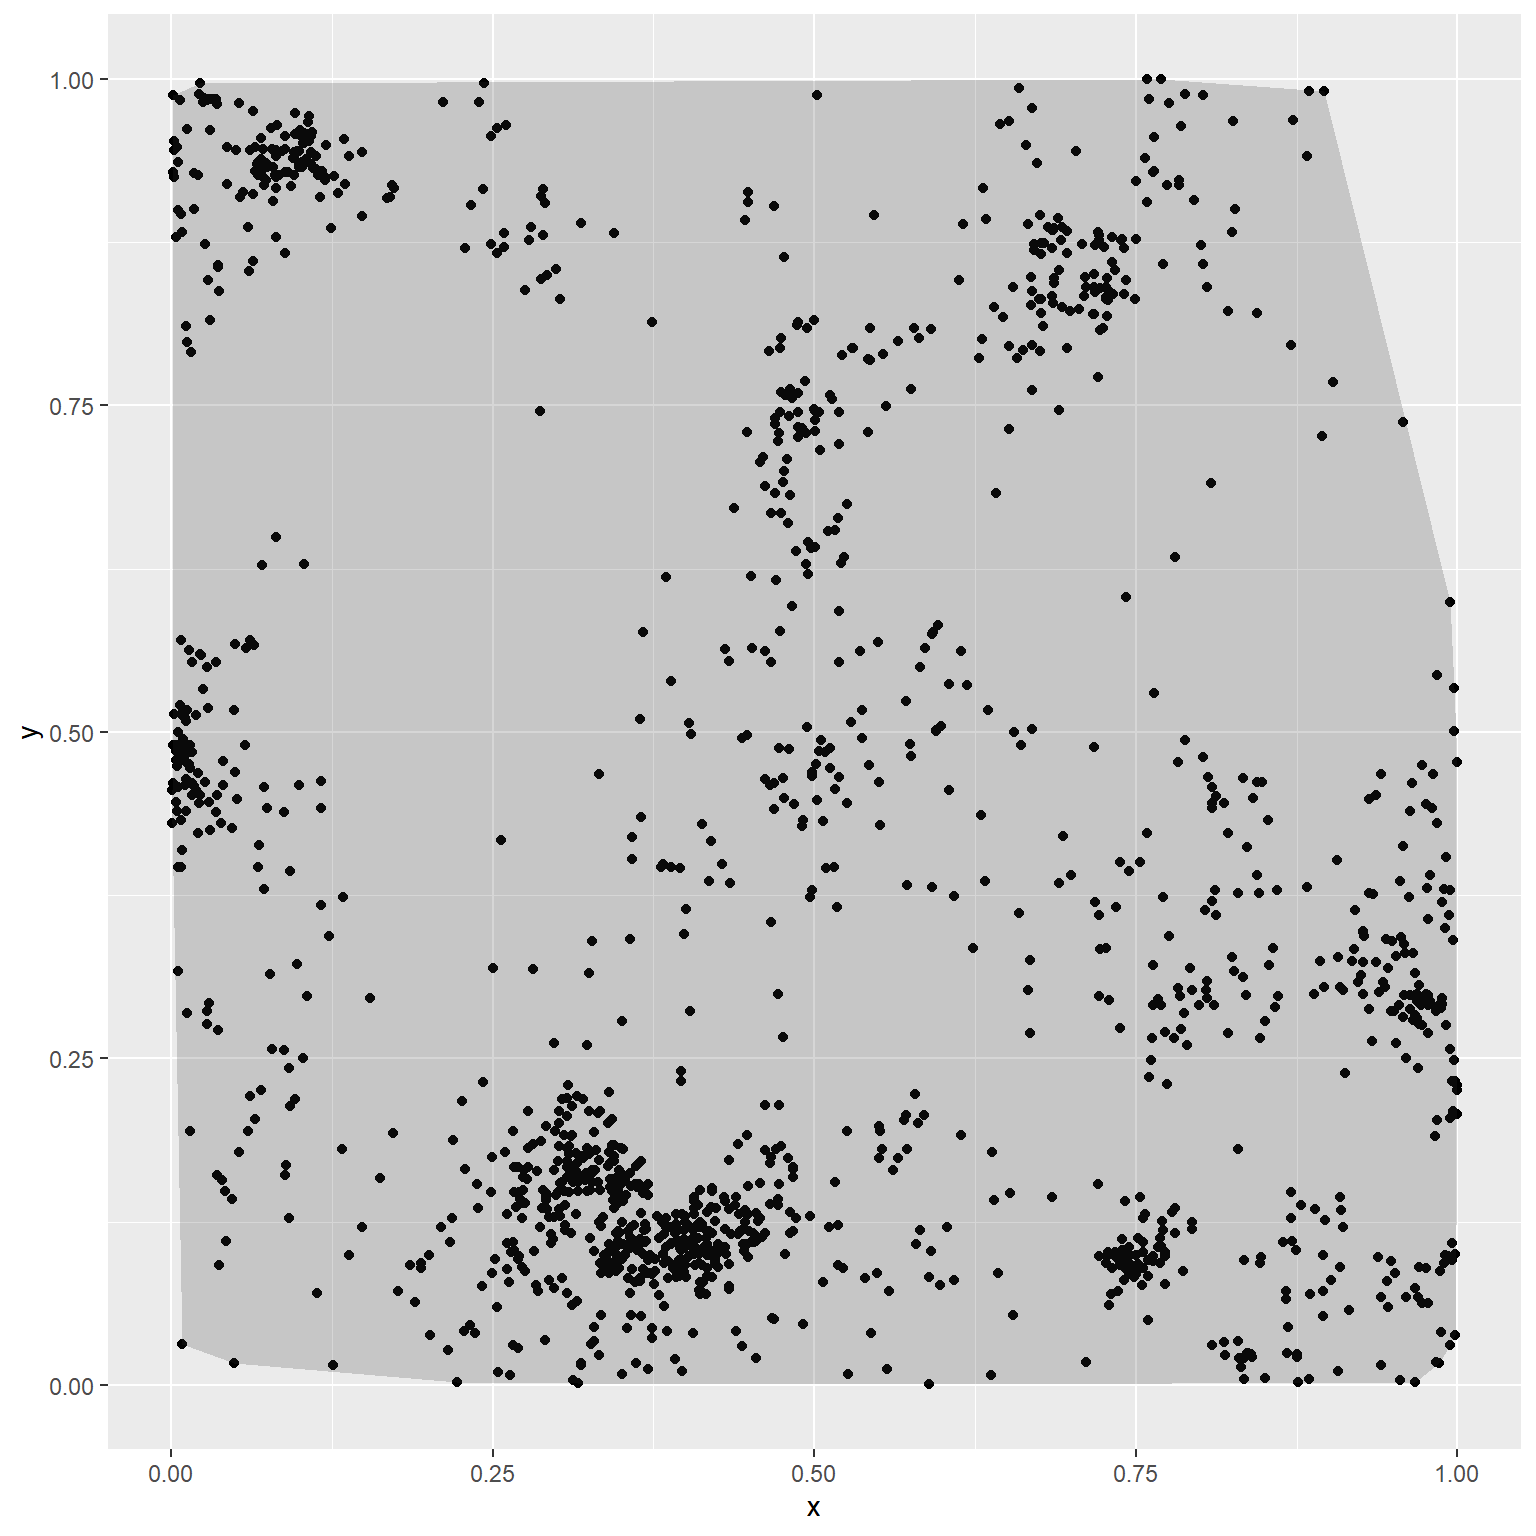 Minimum convex polygon (left) and 95th percentile isopleth of a kernel density estimate of $f_u(s)$ (right) for the simulated point pattern data in Chapter 3.